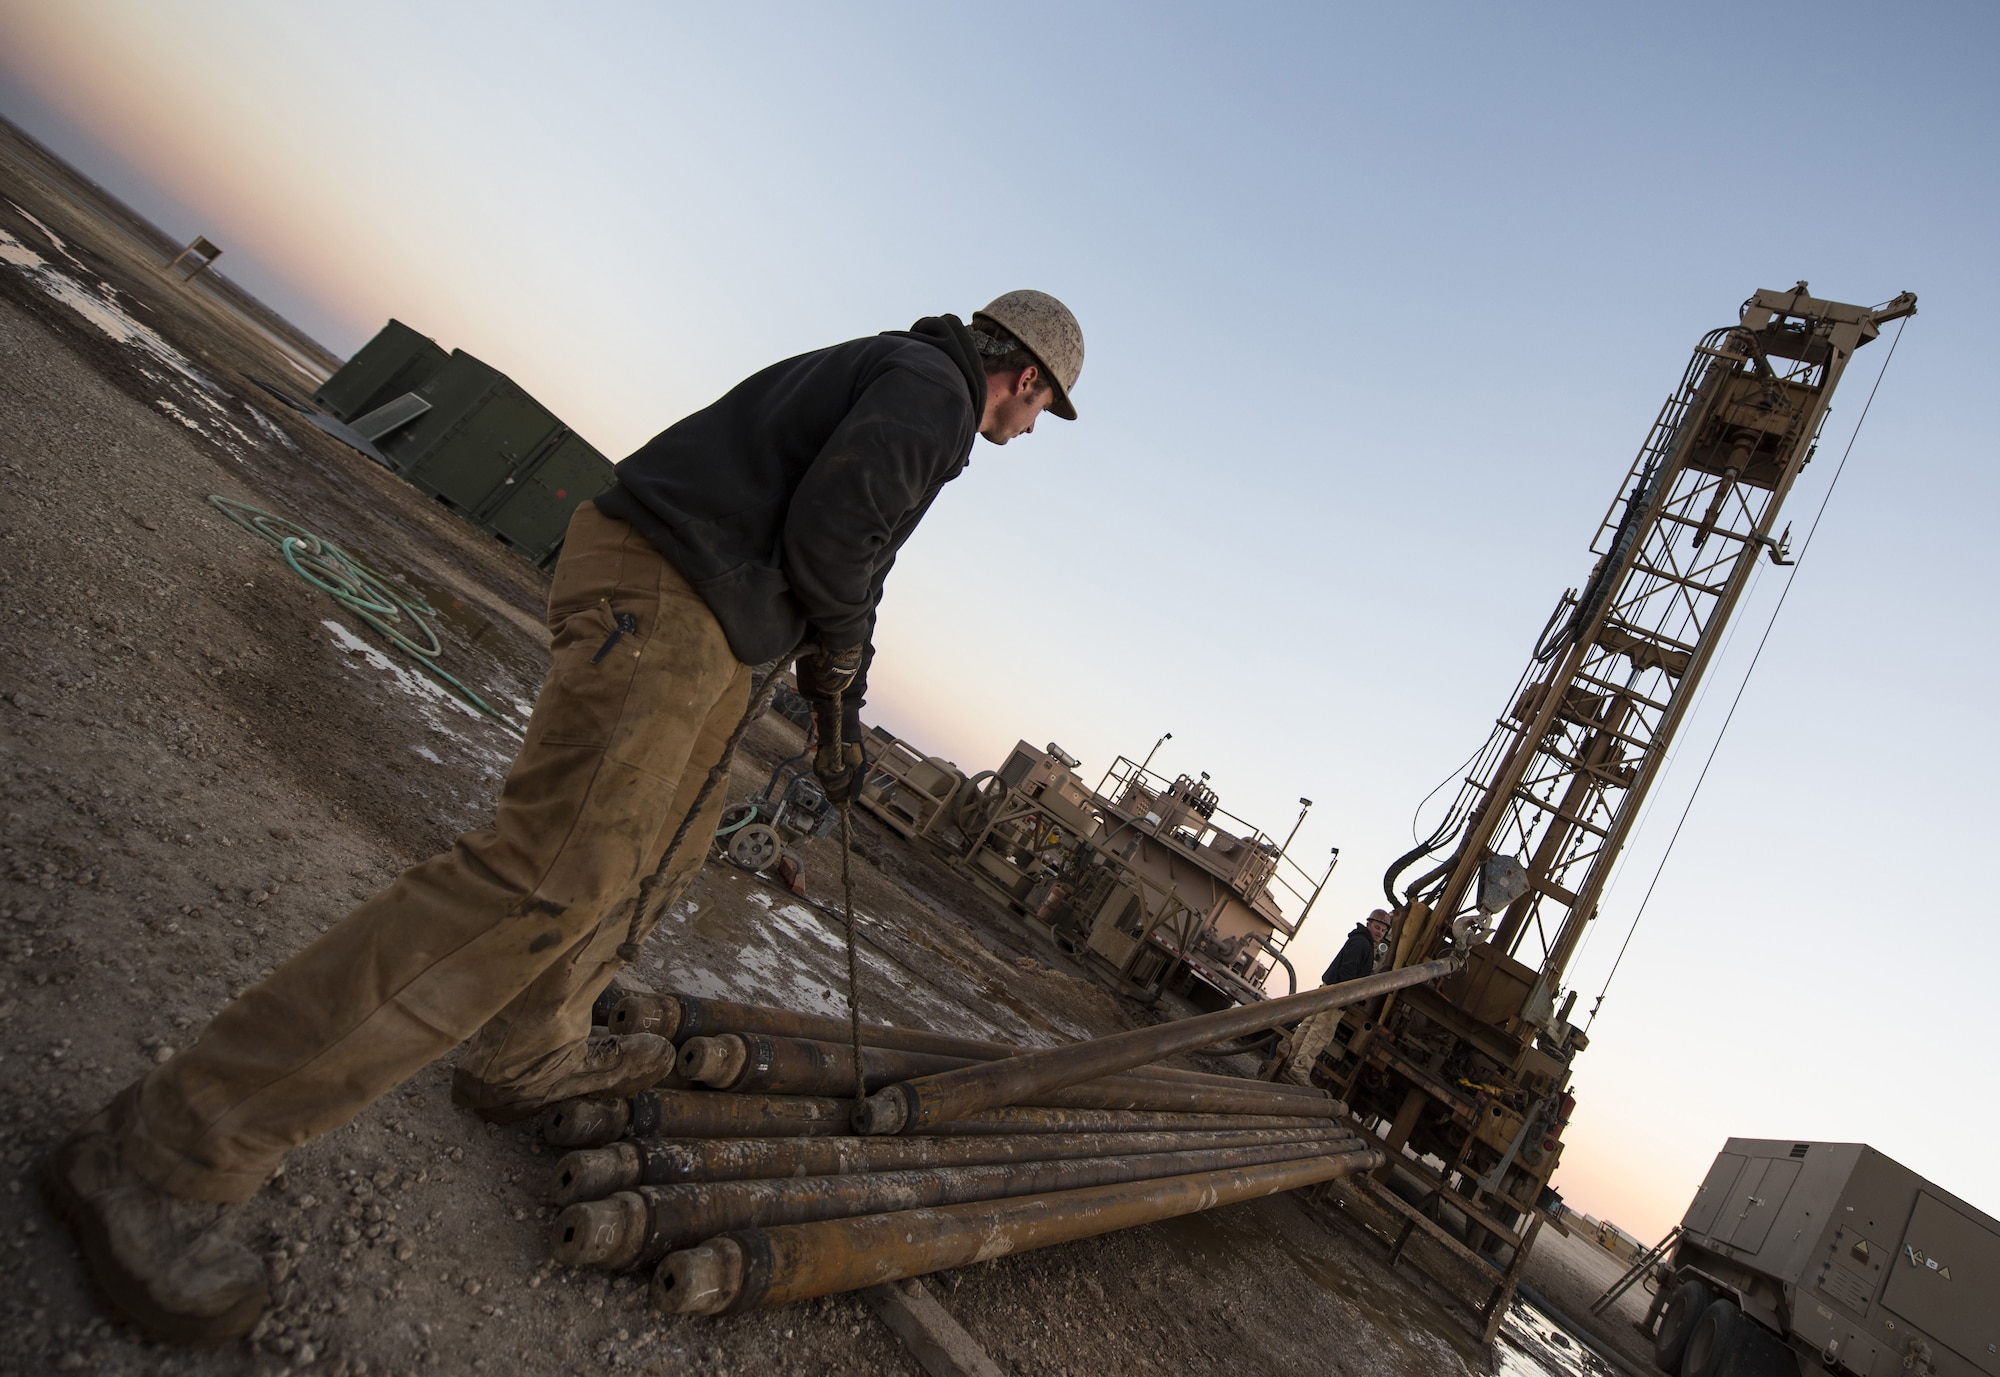 SSgt Zachary Gosteli, a vehicle mechanic assigned to the 557th Expeditionary RED HORSE Squadron, guides heavy steel piping into position on a well drilling site January 31, 2018 at an undisclosed location in Southwest Asia. The crew removed piping in order to gain access to screens, which gradually filter groundwater as it rises to the top. (U.S. Air Force photo by Staff Sgt. Joshua Kleinholz)